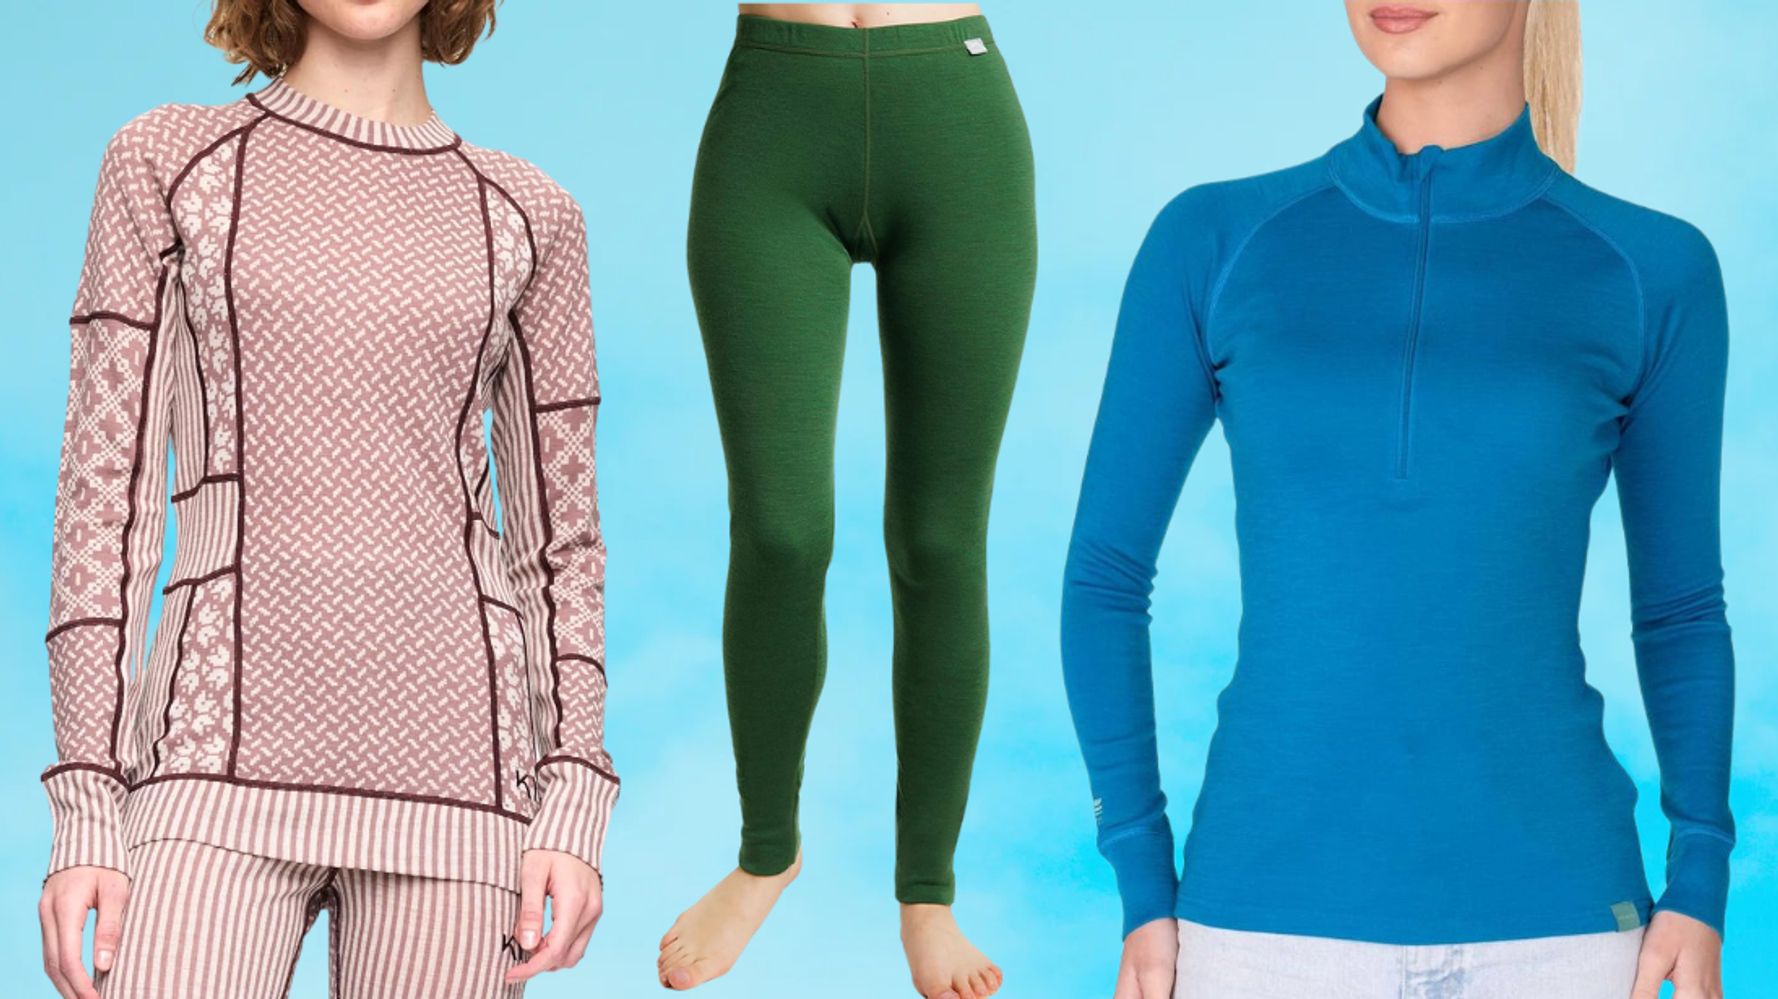 We Found A Treasure Trove Of Affordable Merino Wool Base Layers At